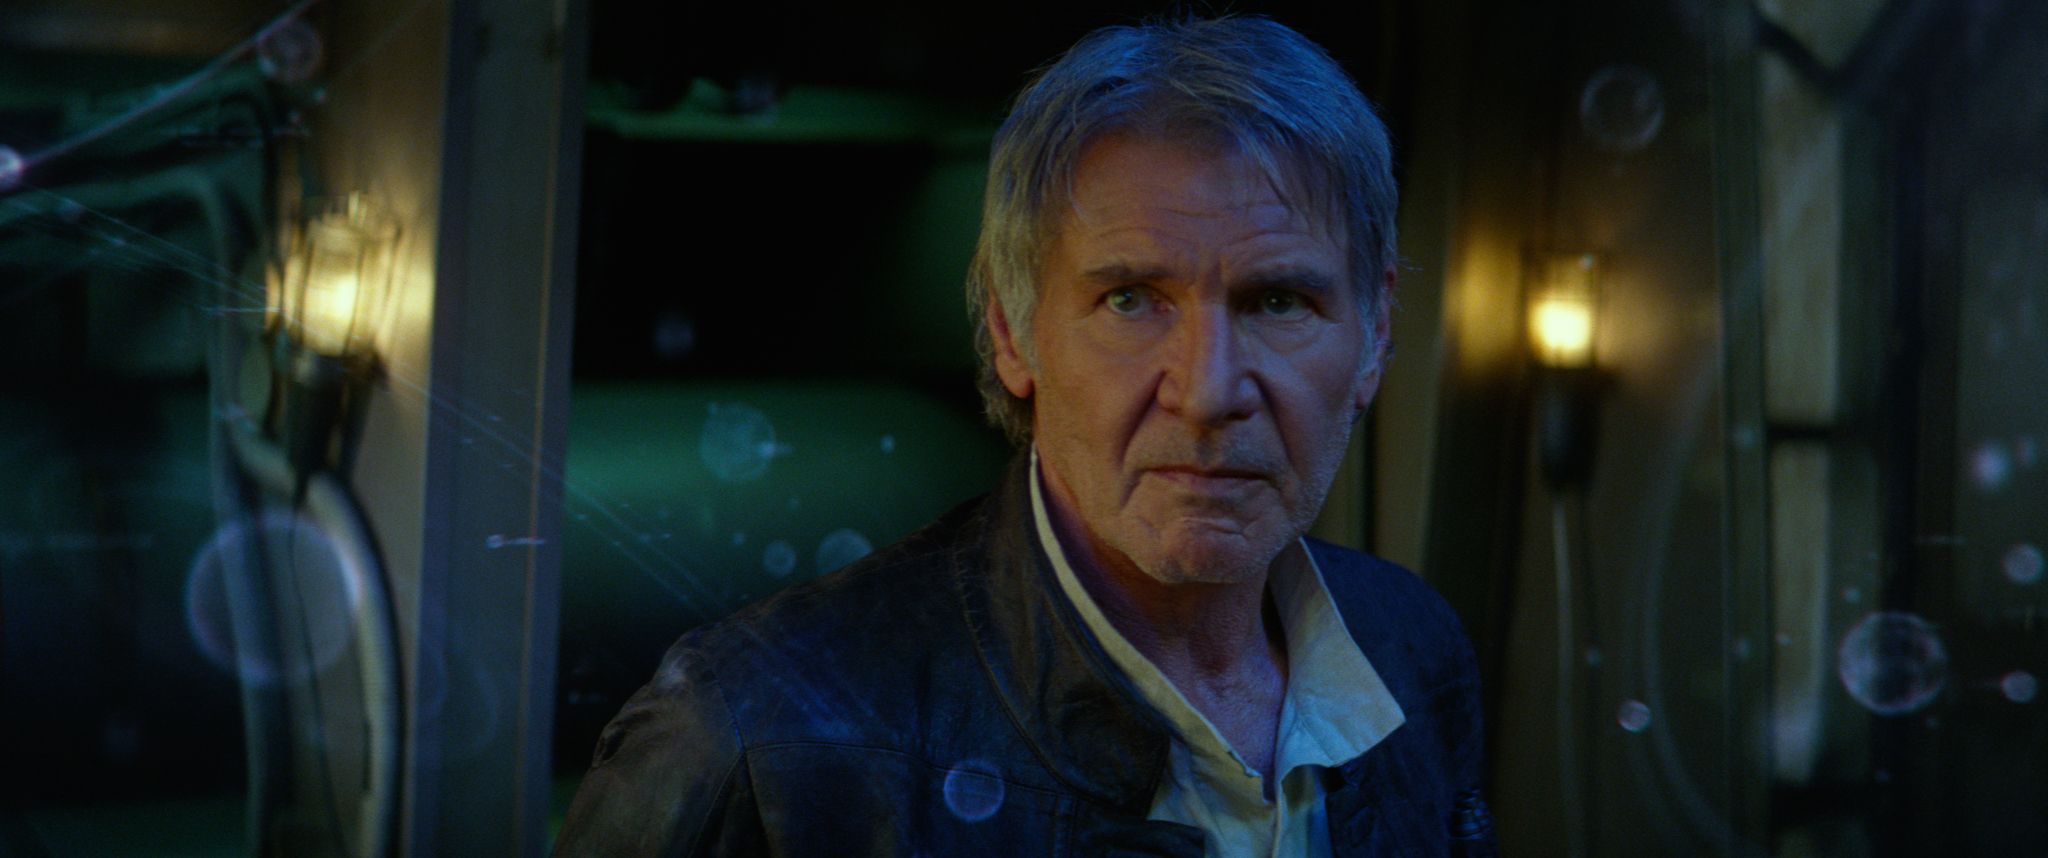 star-wars-the-force-awakens-harrison-ford-han-solo